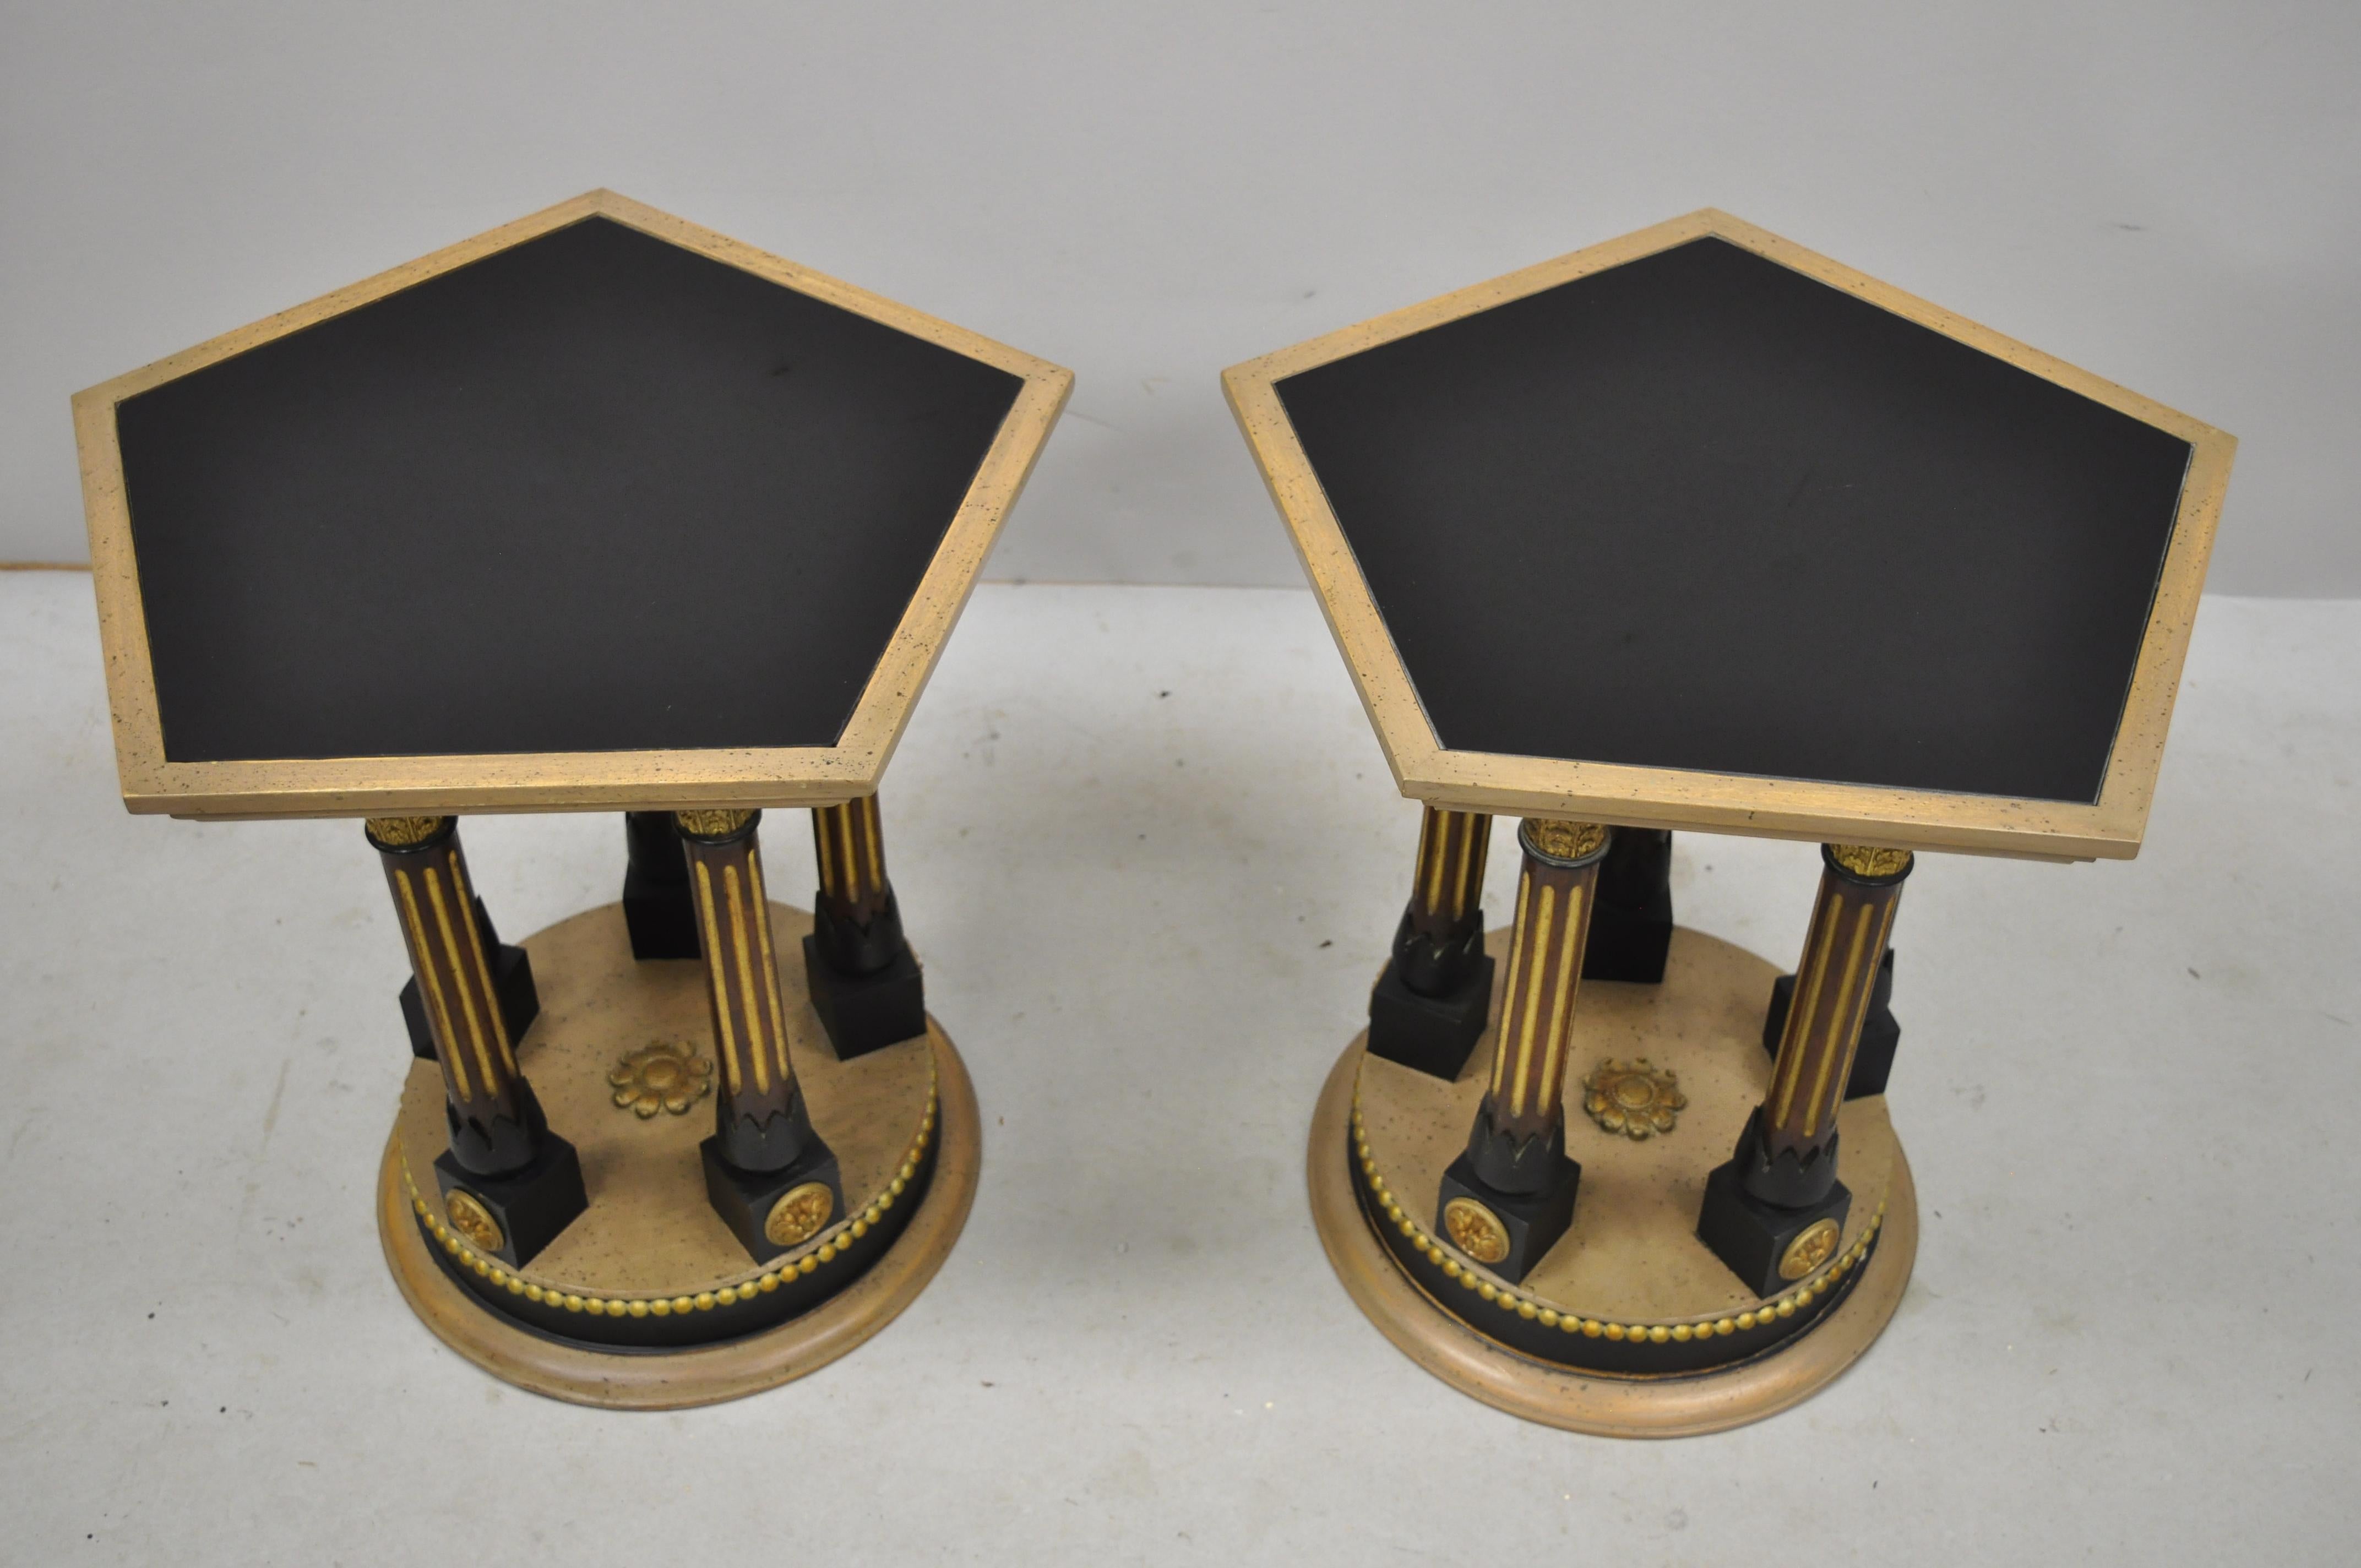 Pair of vintage French empire black gold Corinthian column glass top hexagon small side tables.
Listing includes black glass tops, Corinthian column-form supports, hexagonal top, great style and form, circa mid-20th century. Measurements: 18.5